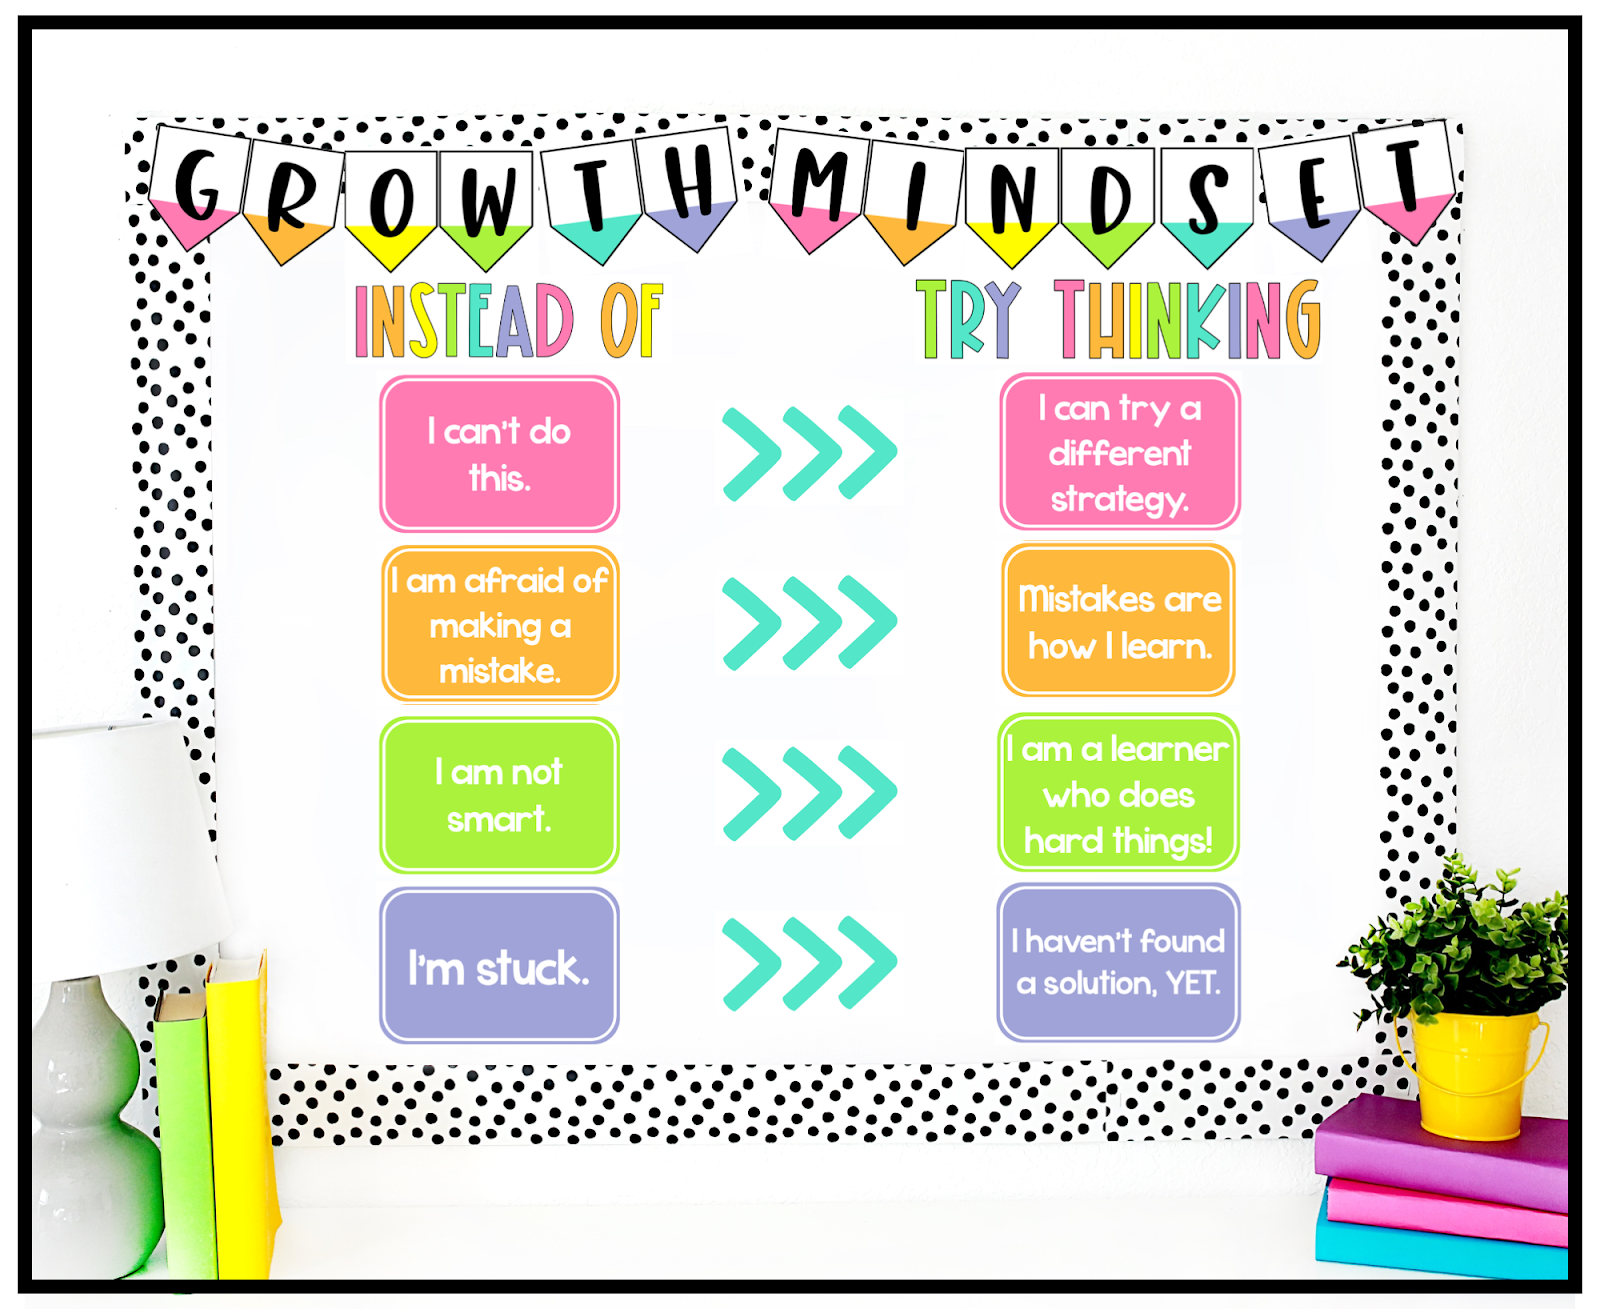 This image shows a growth mindset bulletin board display. One side of the display says "Instead of" and lists phrases or sayings like "I can't do this" or "I am not smart". The other side of the display says "Try thinking" and lists phrases like "I can try a different strategy" and "I am a learner who does hard things!" 